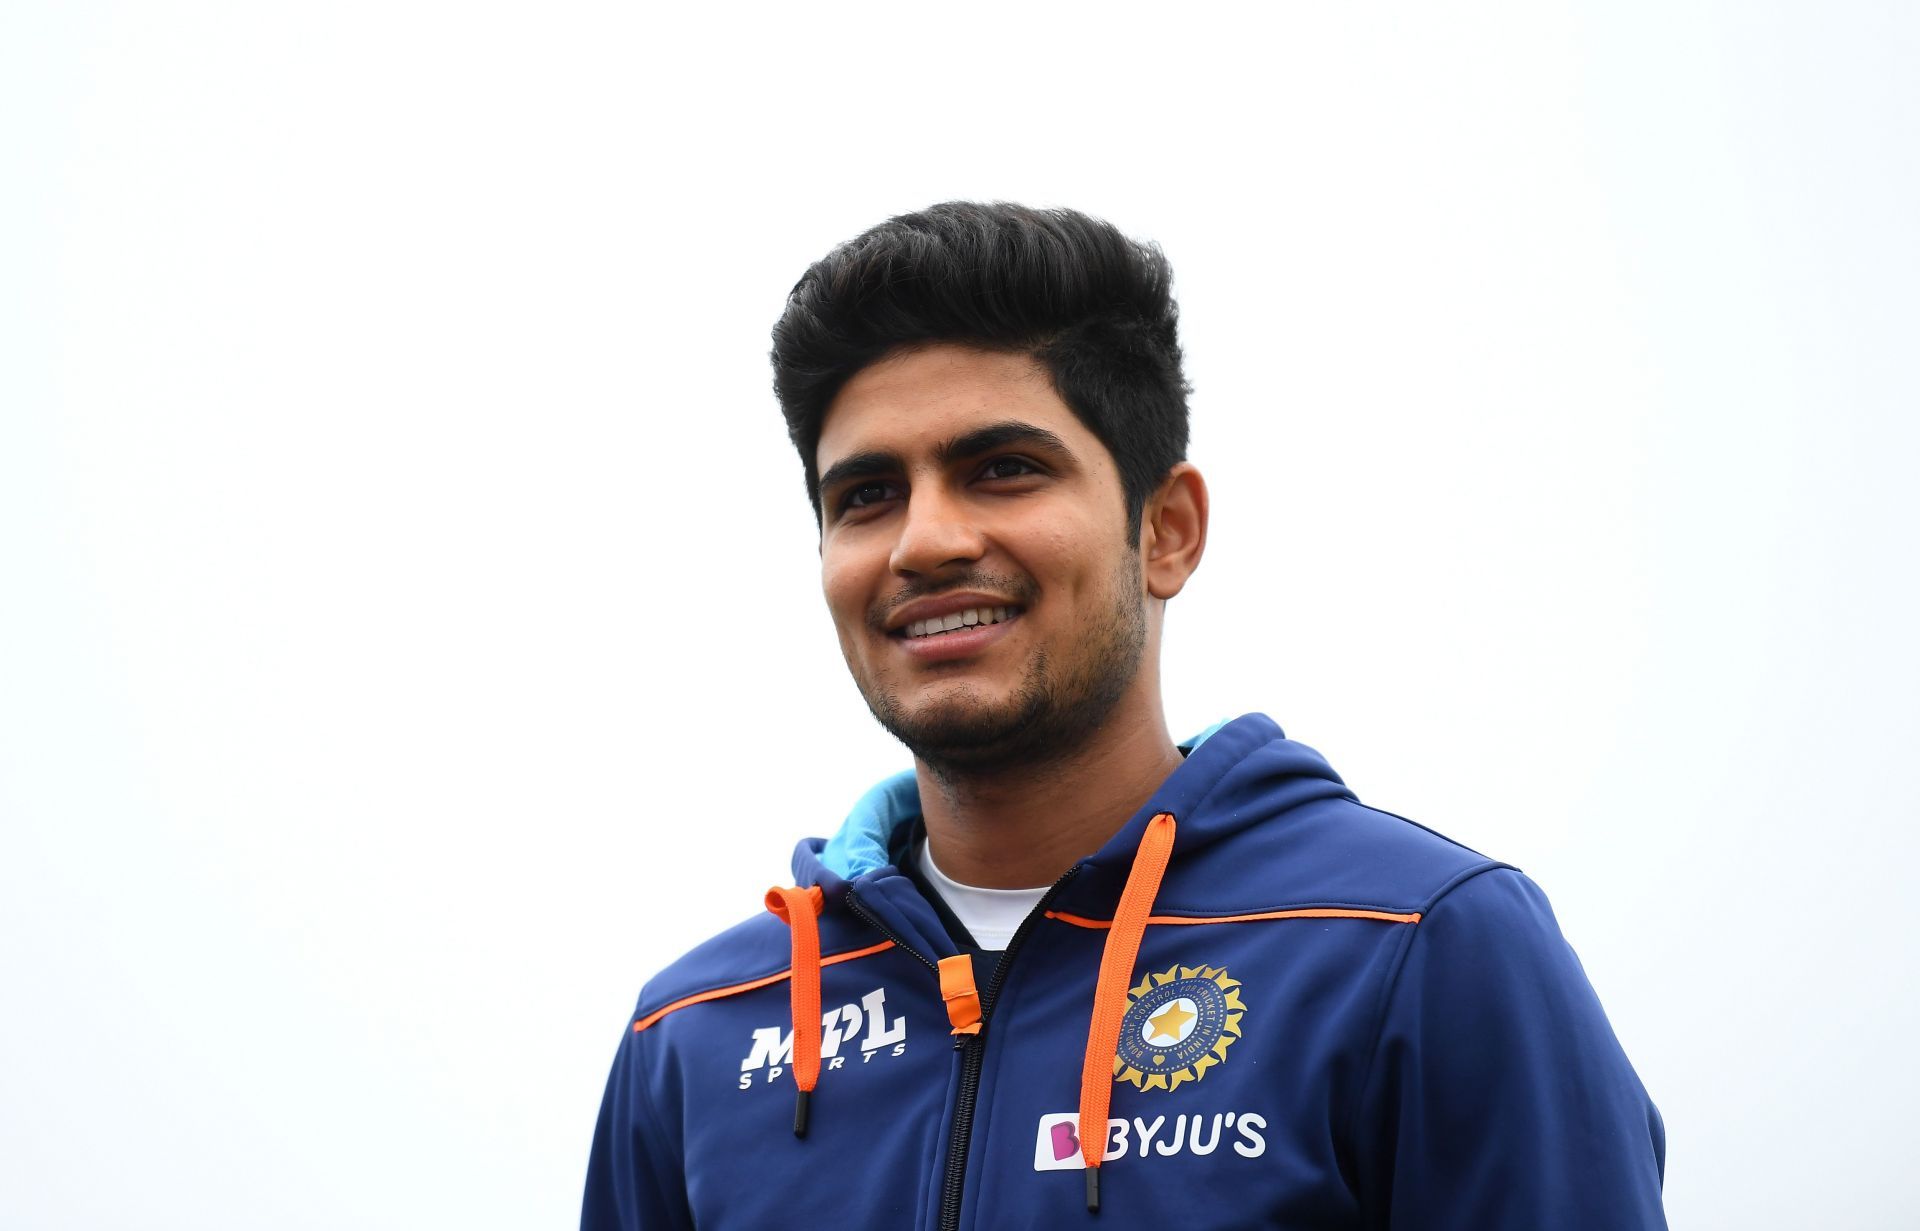 Sachin Tendulkar has spoken on Shubman Gill (in pic), who has had a promising start to his career in Tests.